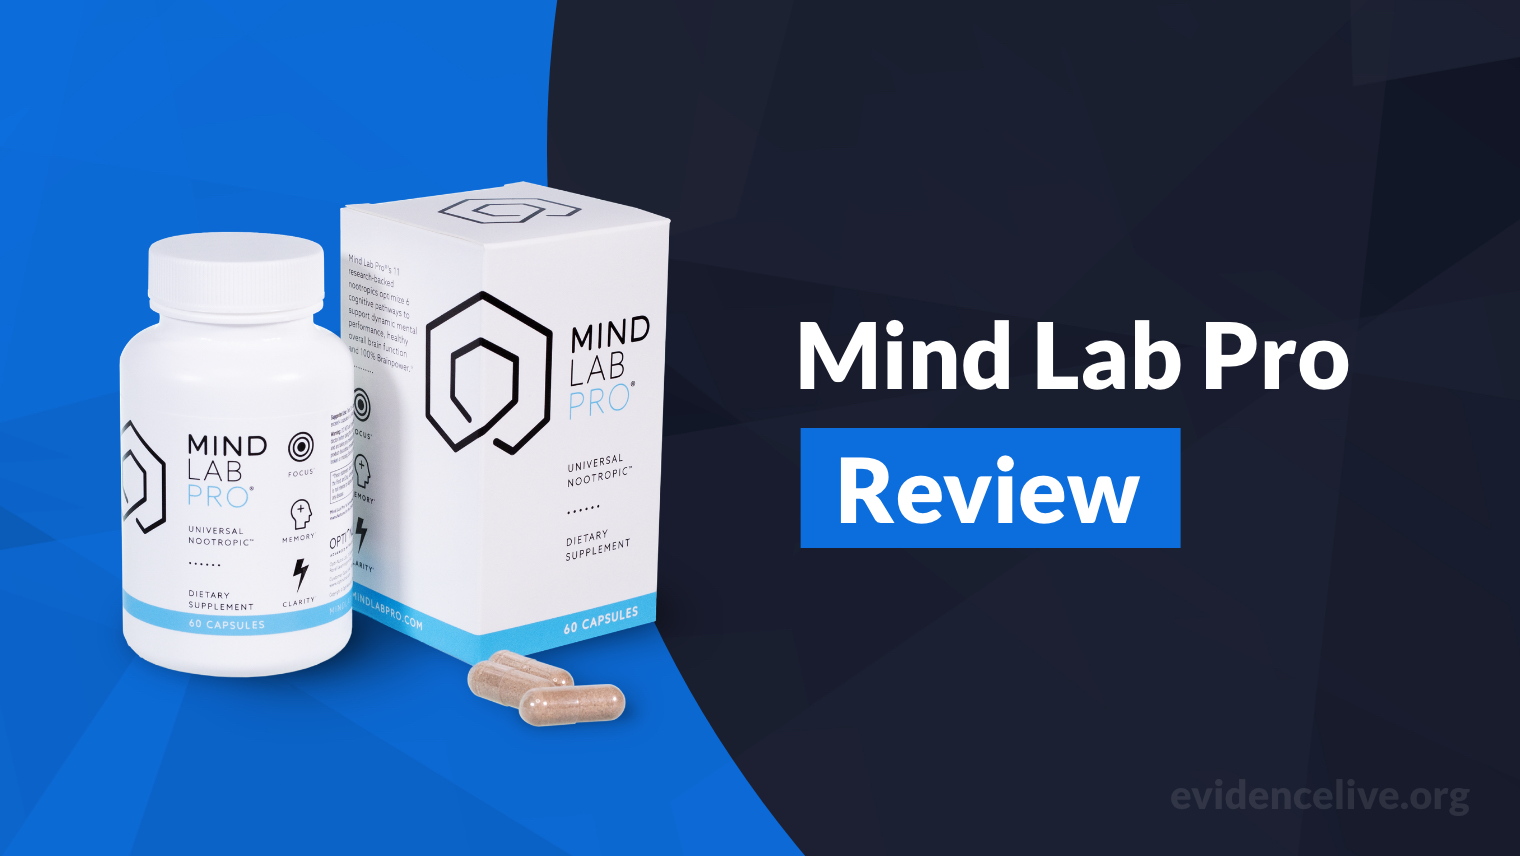 Mind Lab Pro Review: Ingredients, Benefits, and Side Effects